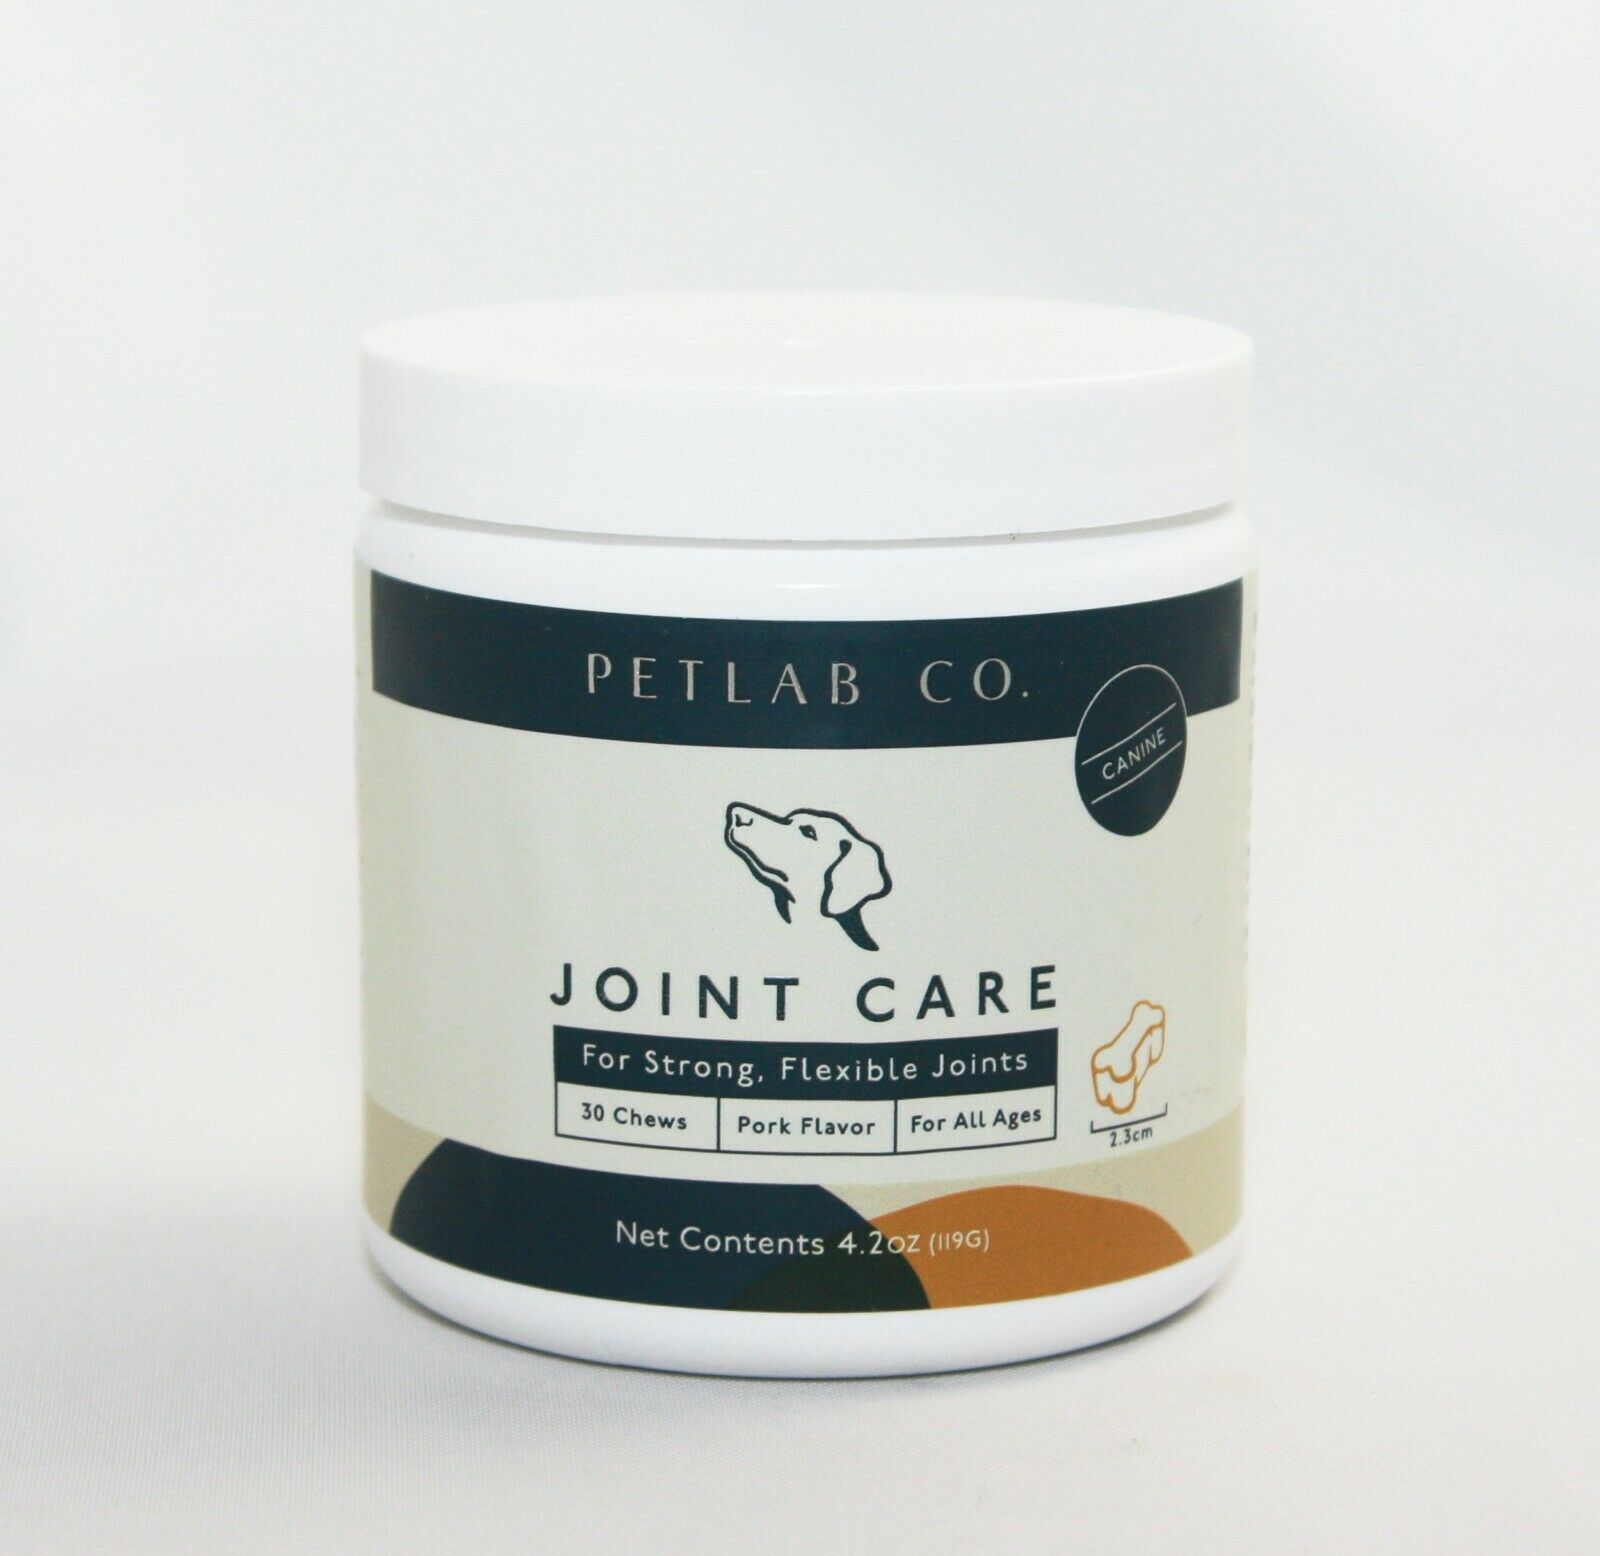 Petlab Co. Joint Health Care Dogs Flexible Joint Diet Support - 30 Chews Pork